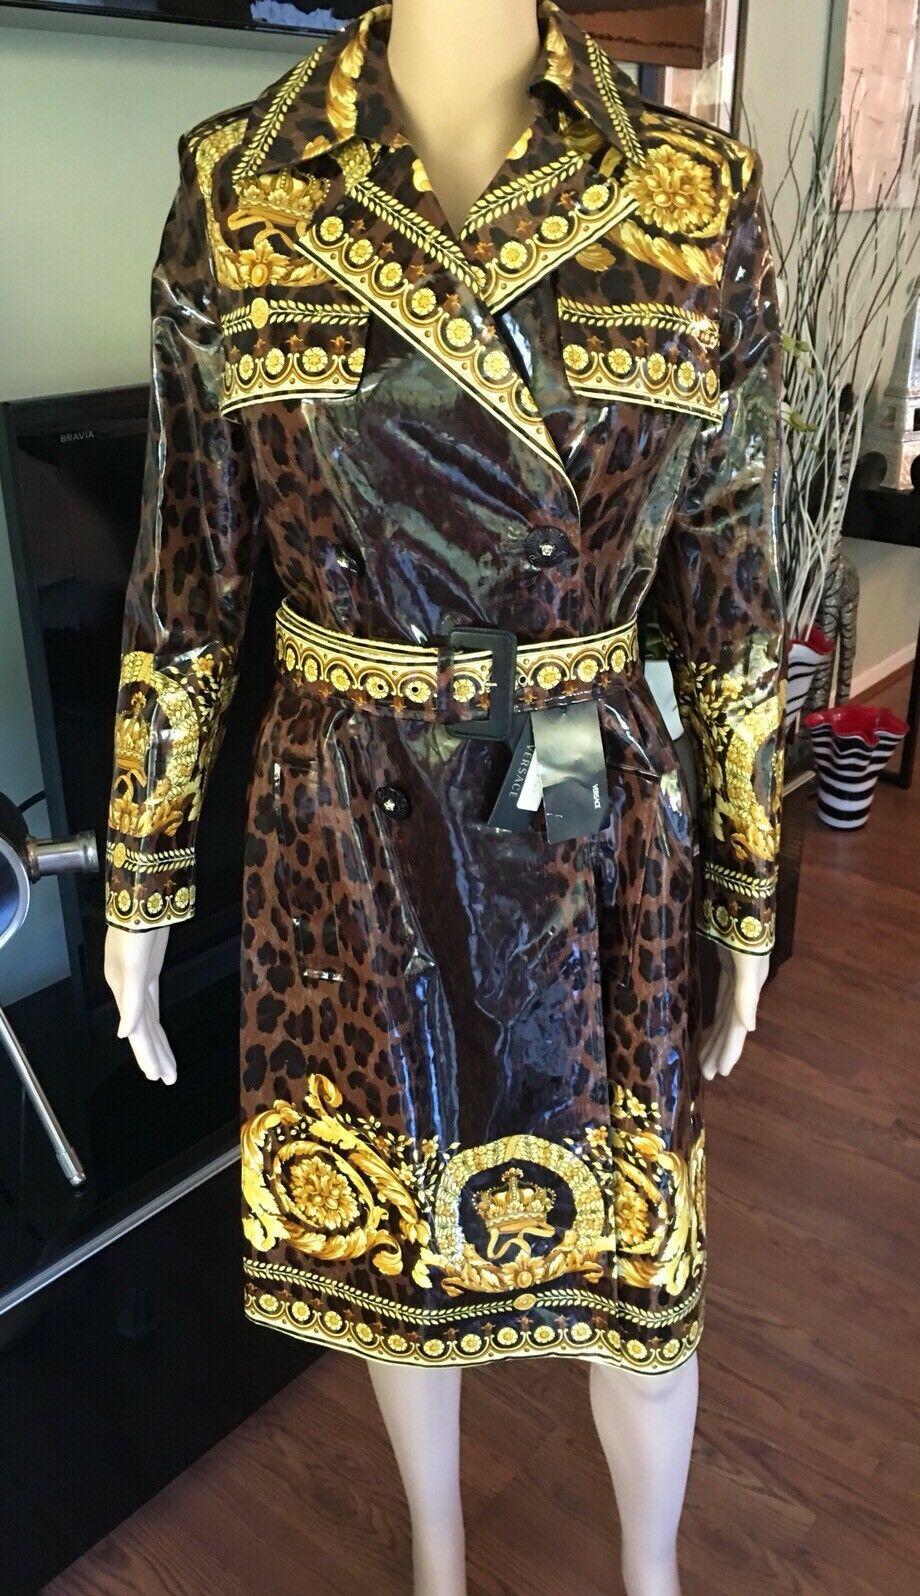 Versace Medusa Signature Print Rain Jacket Coat IT 42

Versace leopard print double-breasted rain coat featuring notched lapels, dual seam pockets, tonal sash tie belt at waist and button closures at front.

About Versace: Founded in 1978 by the